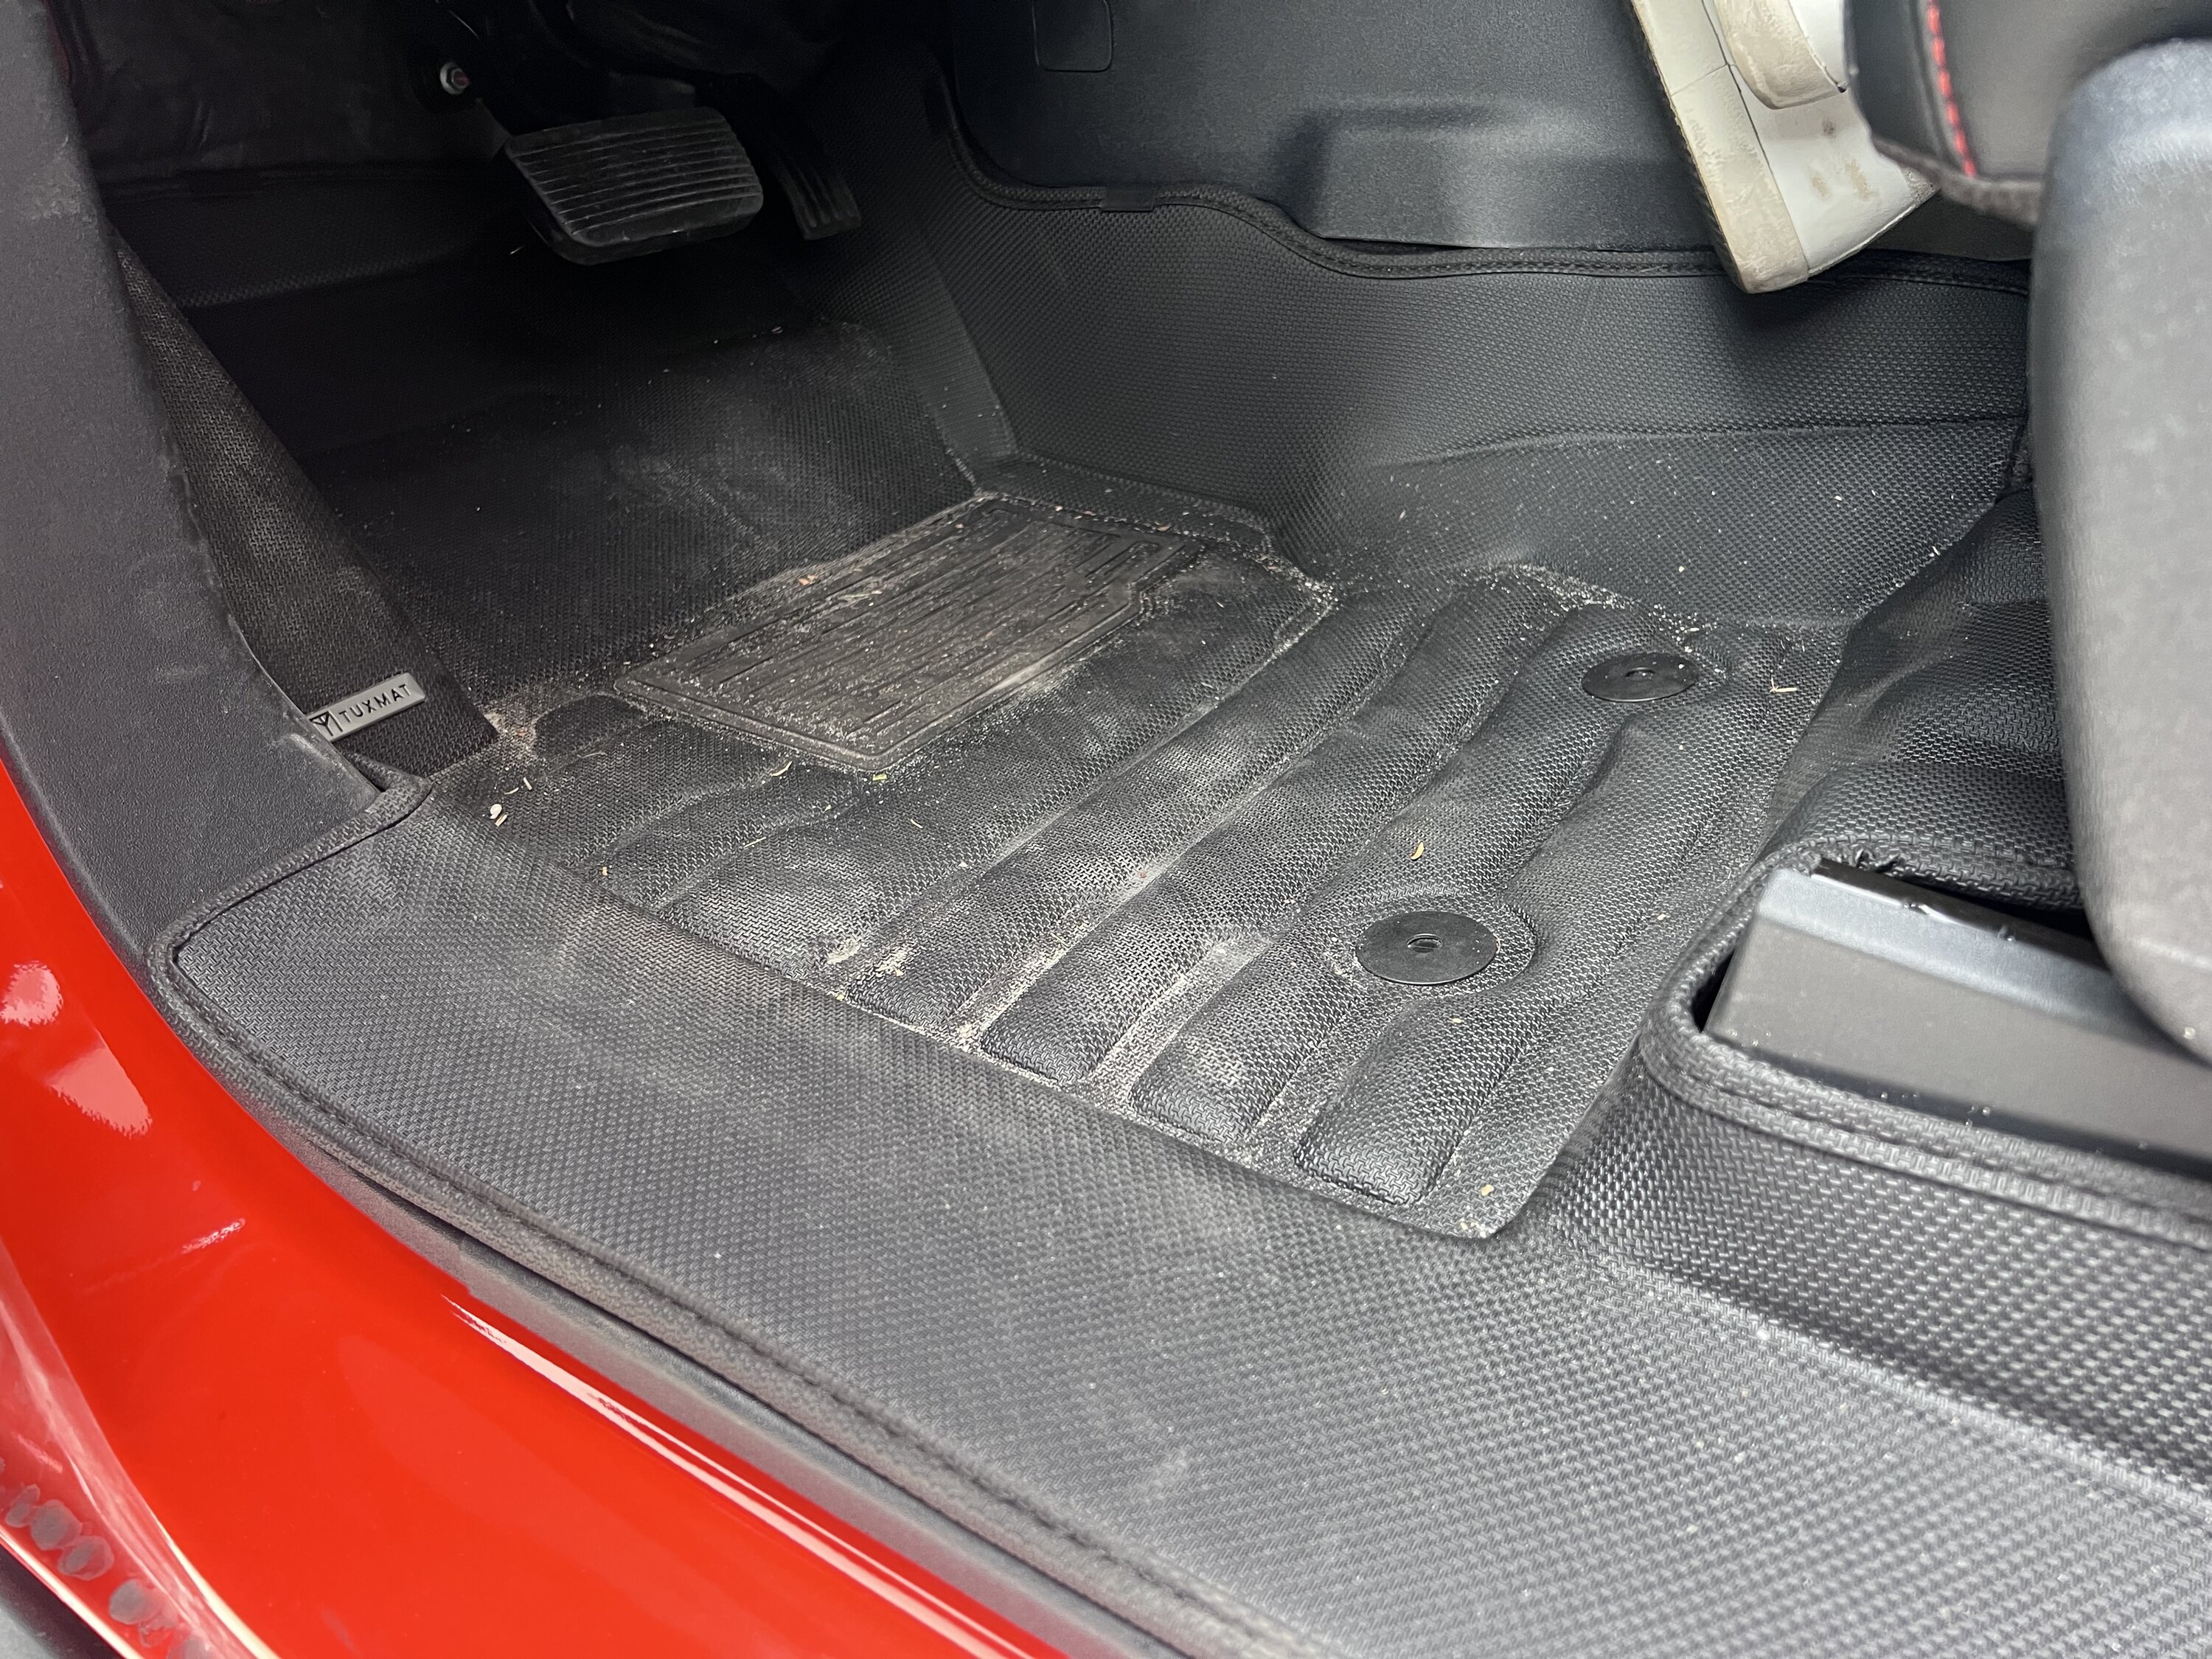 Ford Bronco TuxMat Floor Mats installed on my Bronco Raptor - These things are legit! 44084129-C168-4A89-819B-9729BD0387ED